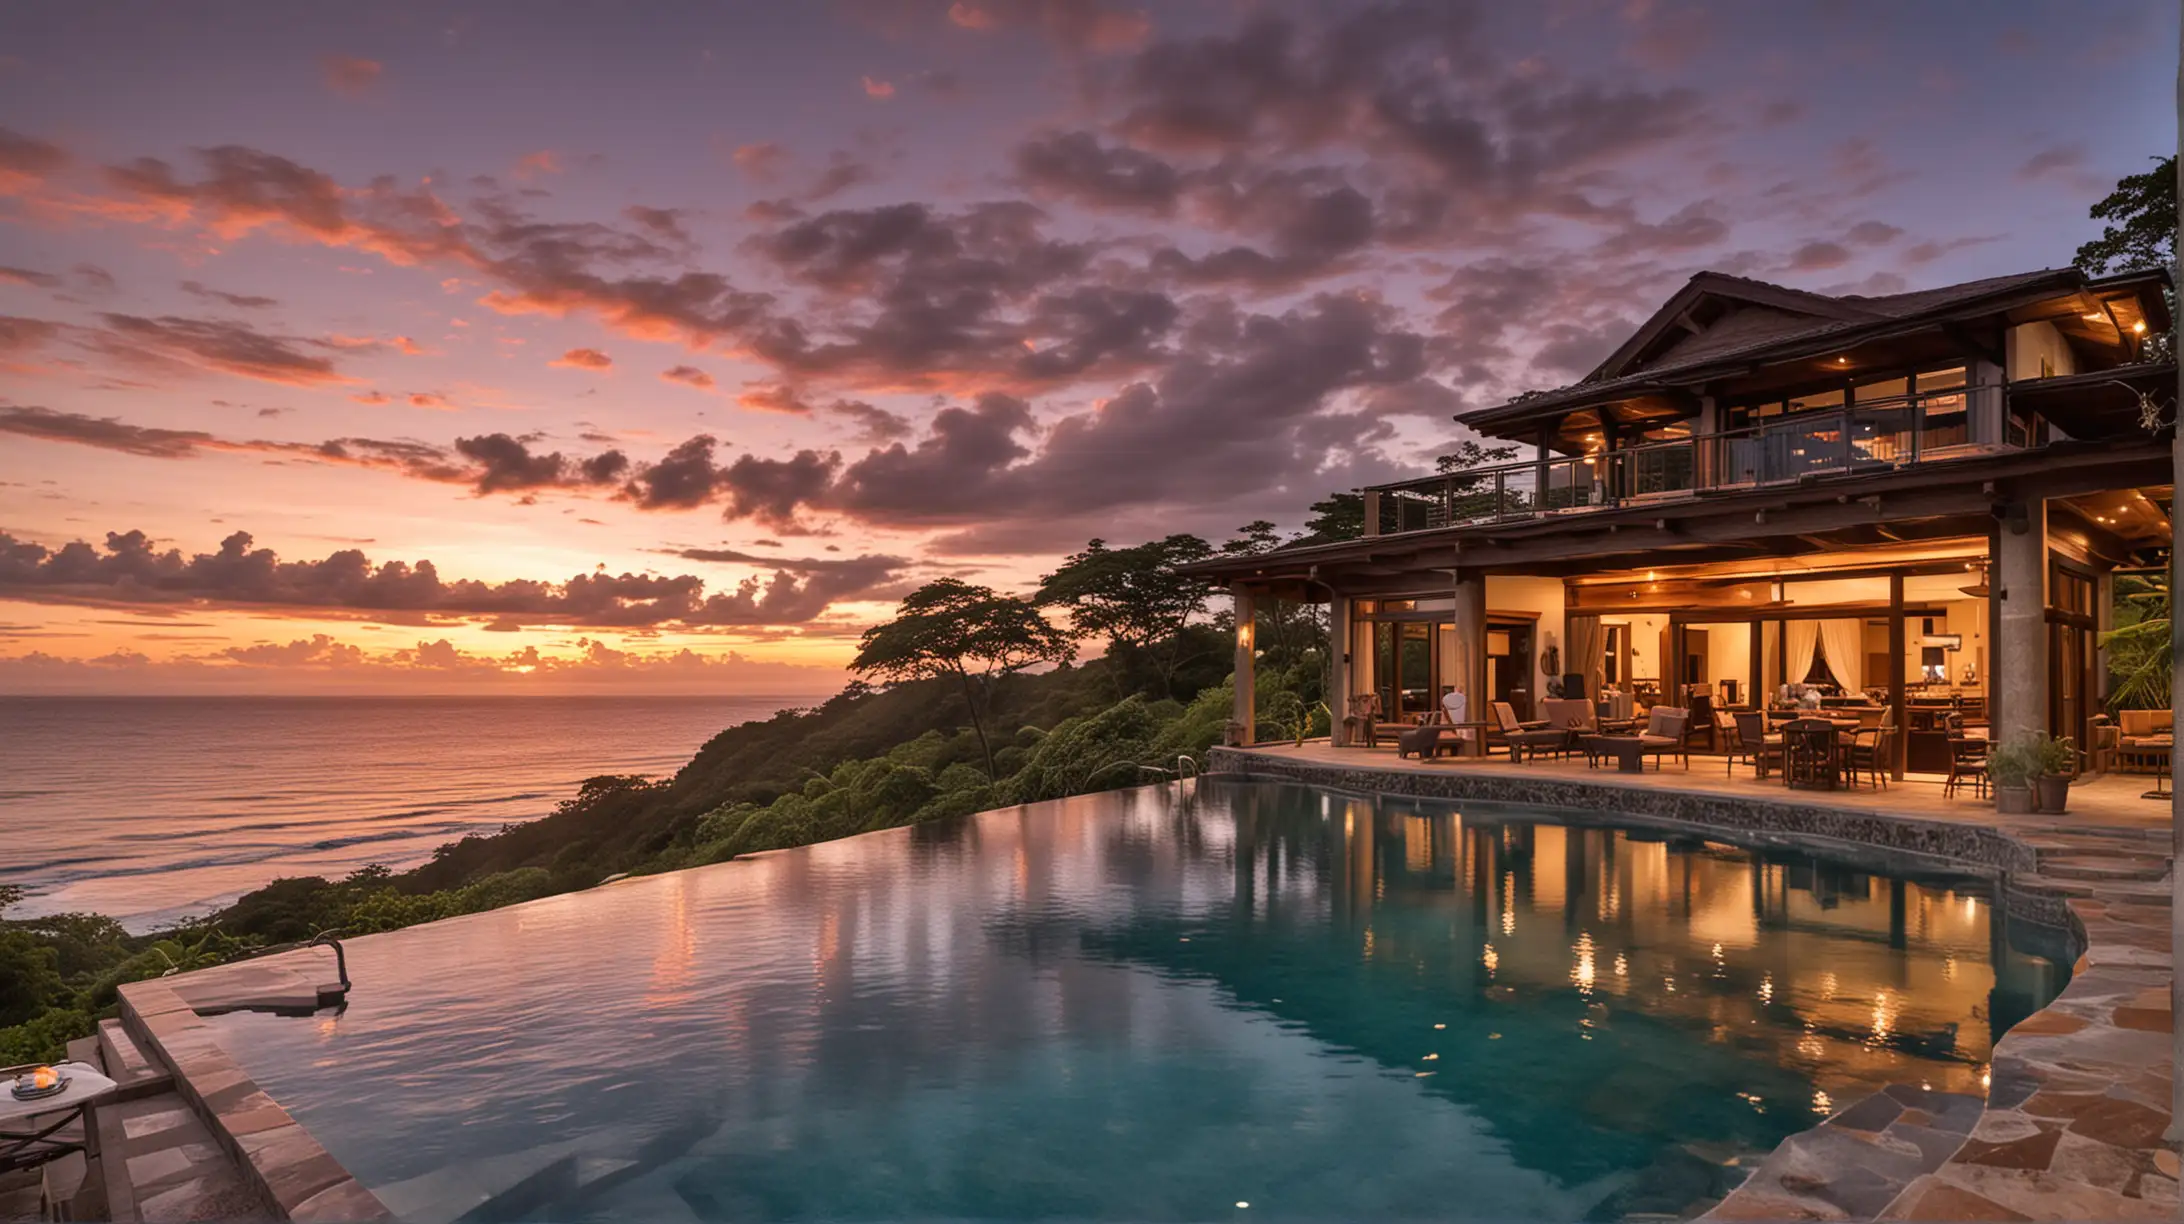 Luxurious Oceanfront Vacation Property in Costa Rica with Sunset Views and Infinity Pool